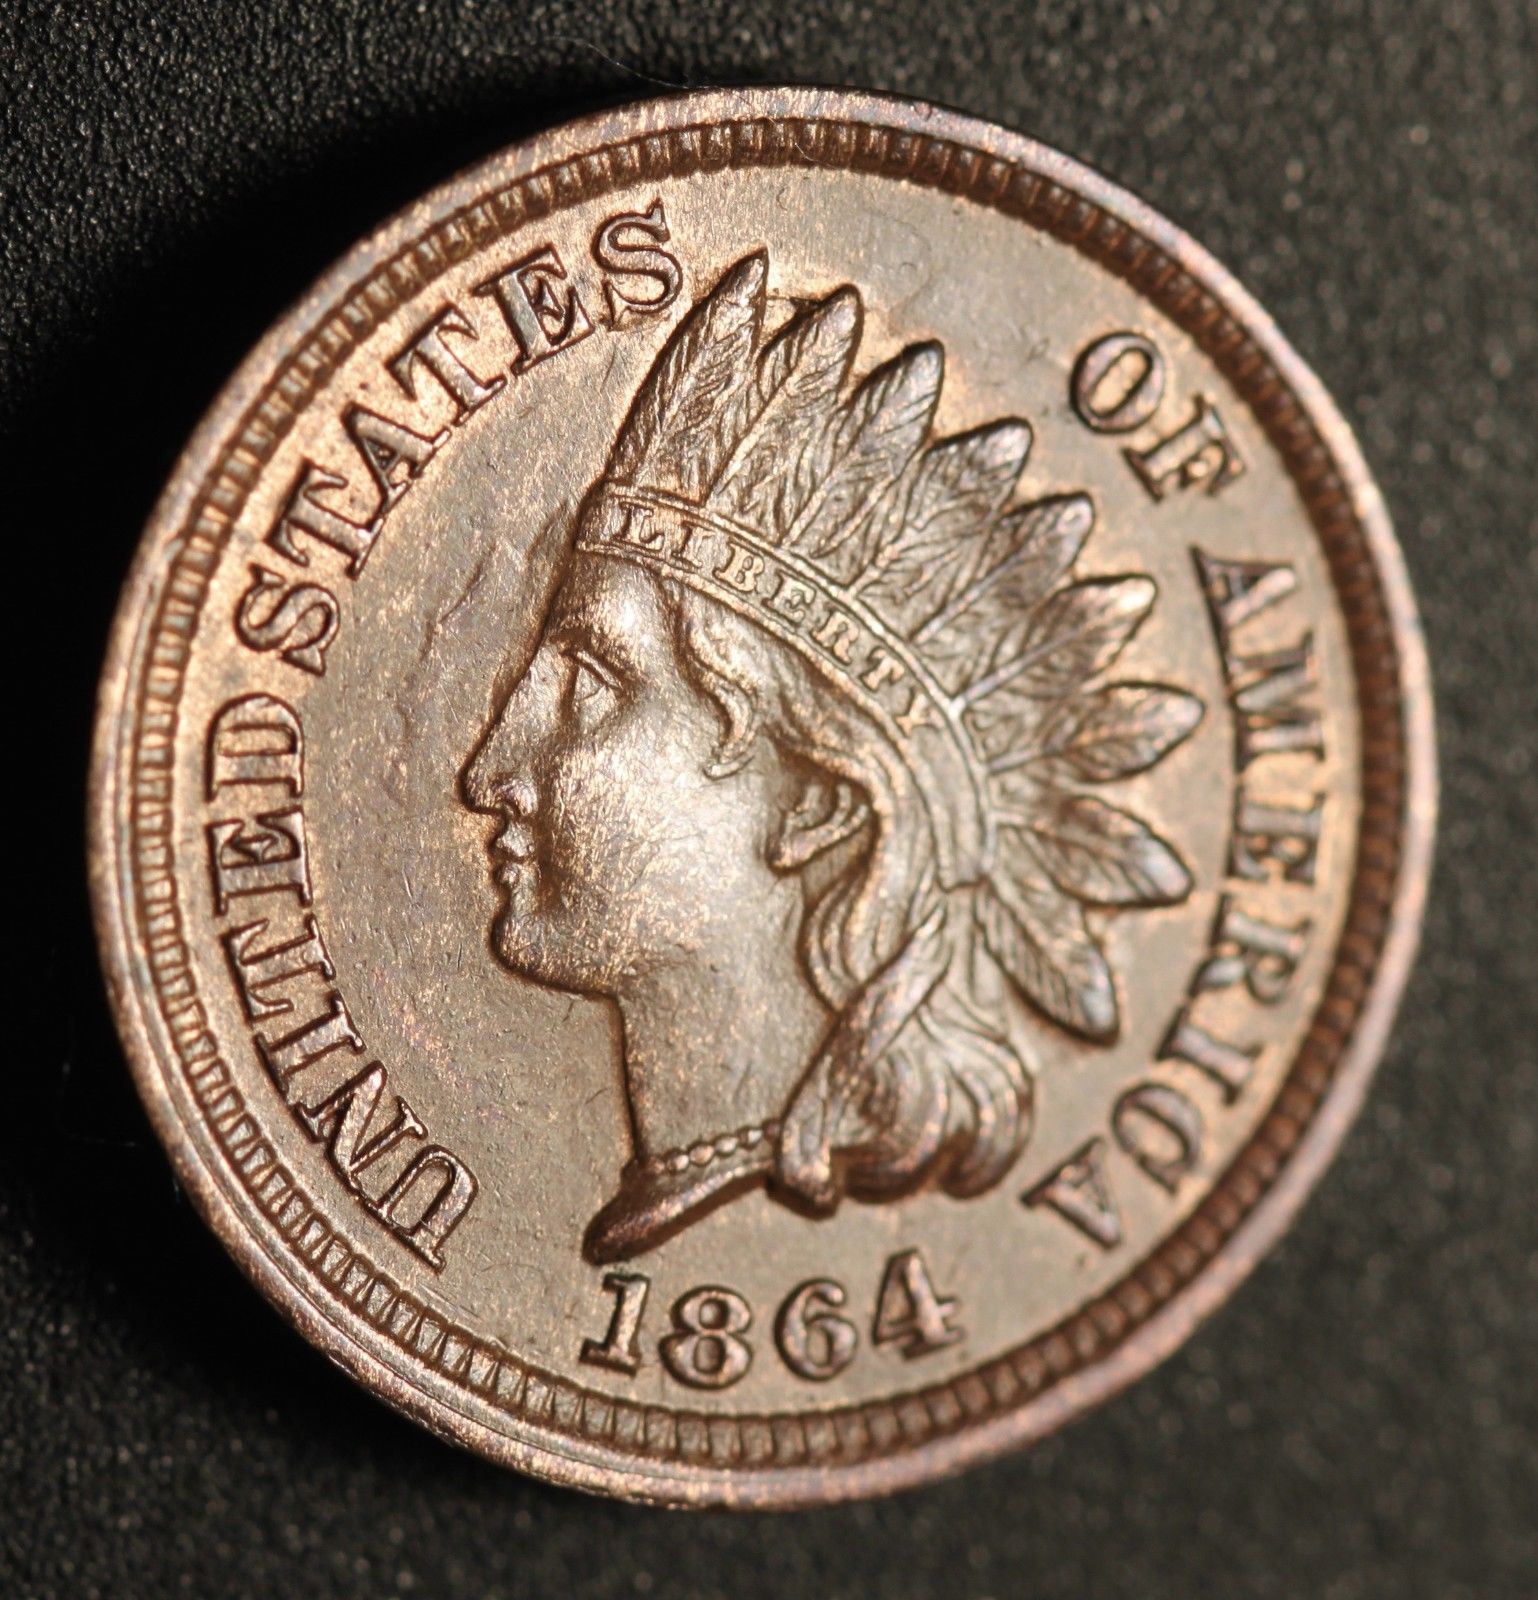 1864 No-L RPD-006 - Indian Head Penny - Photo by Ed Nathanson